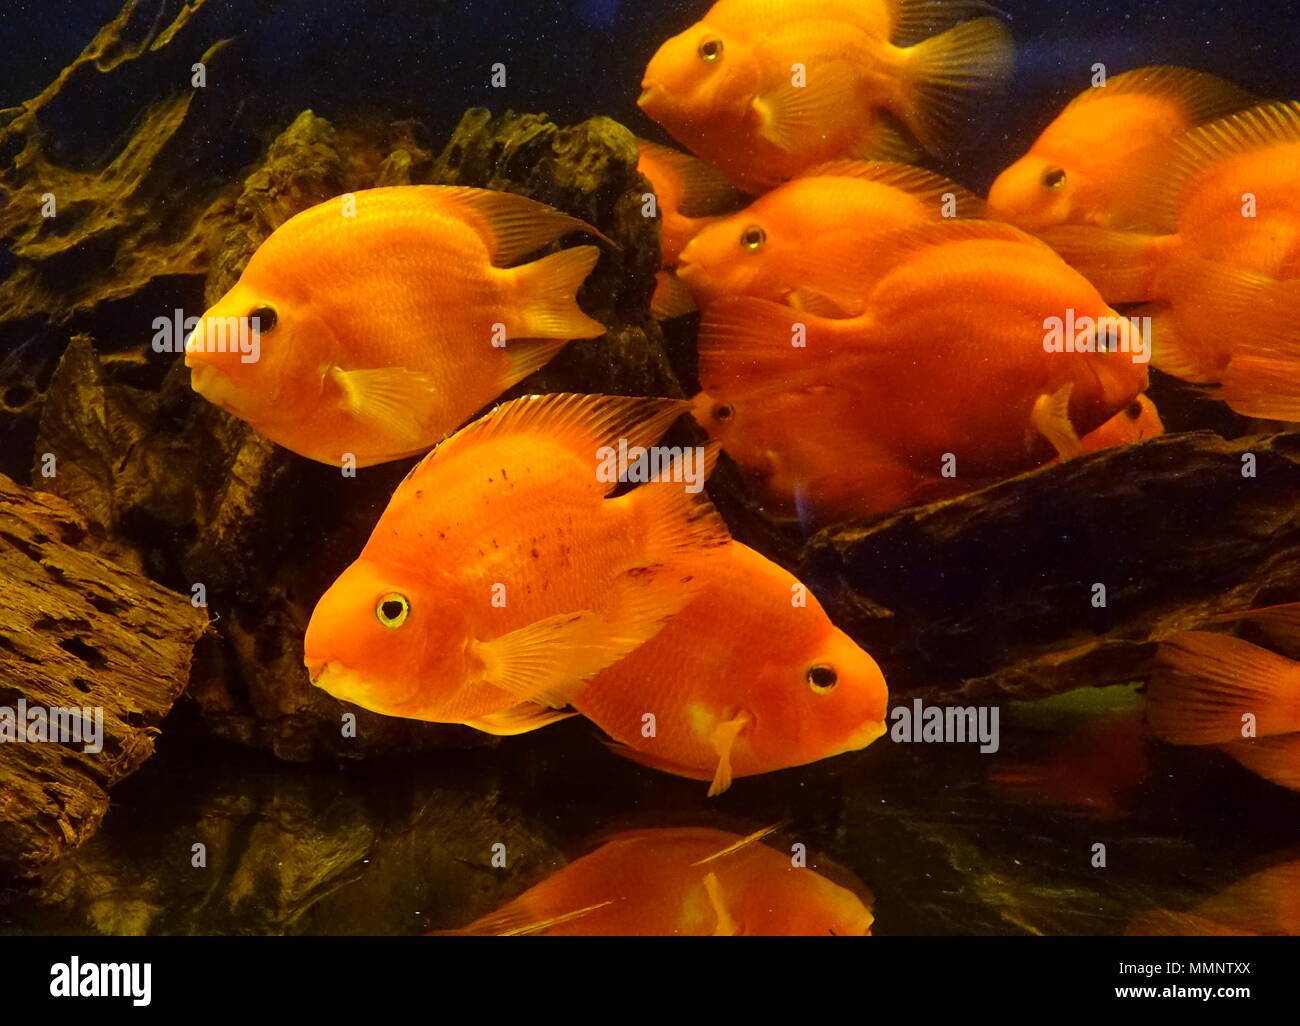 A fish tank with tropical blood parrot cichlid fish Stock Photo